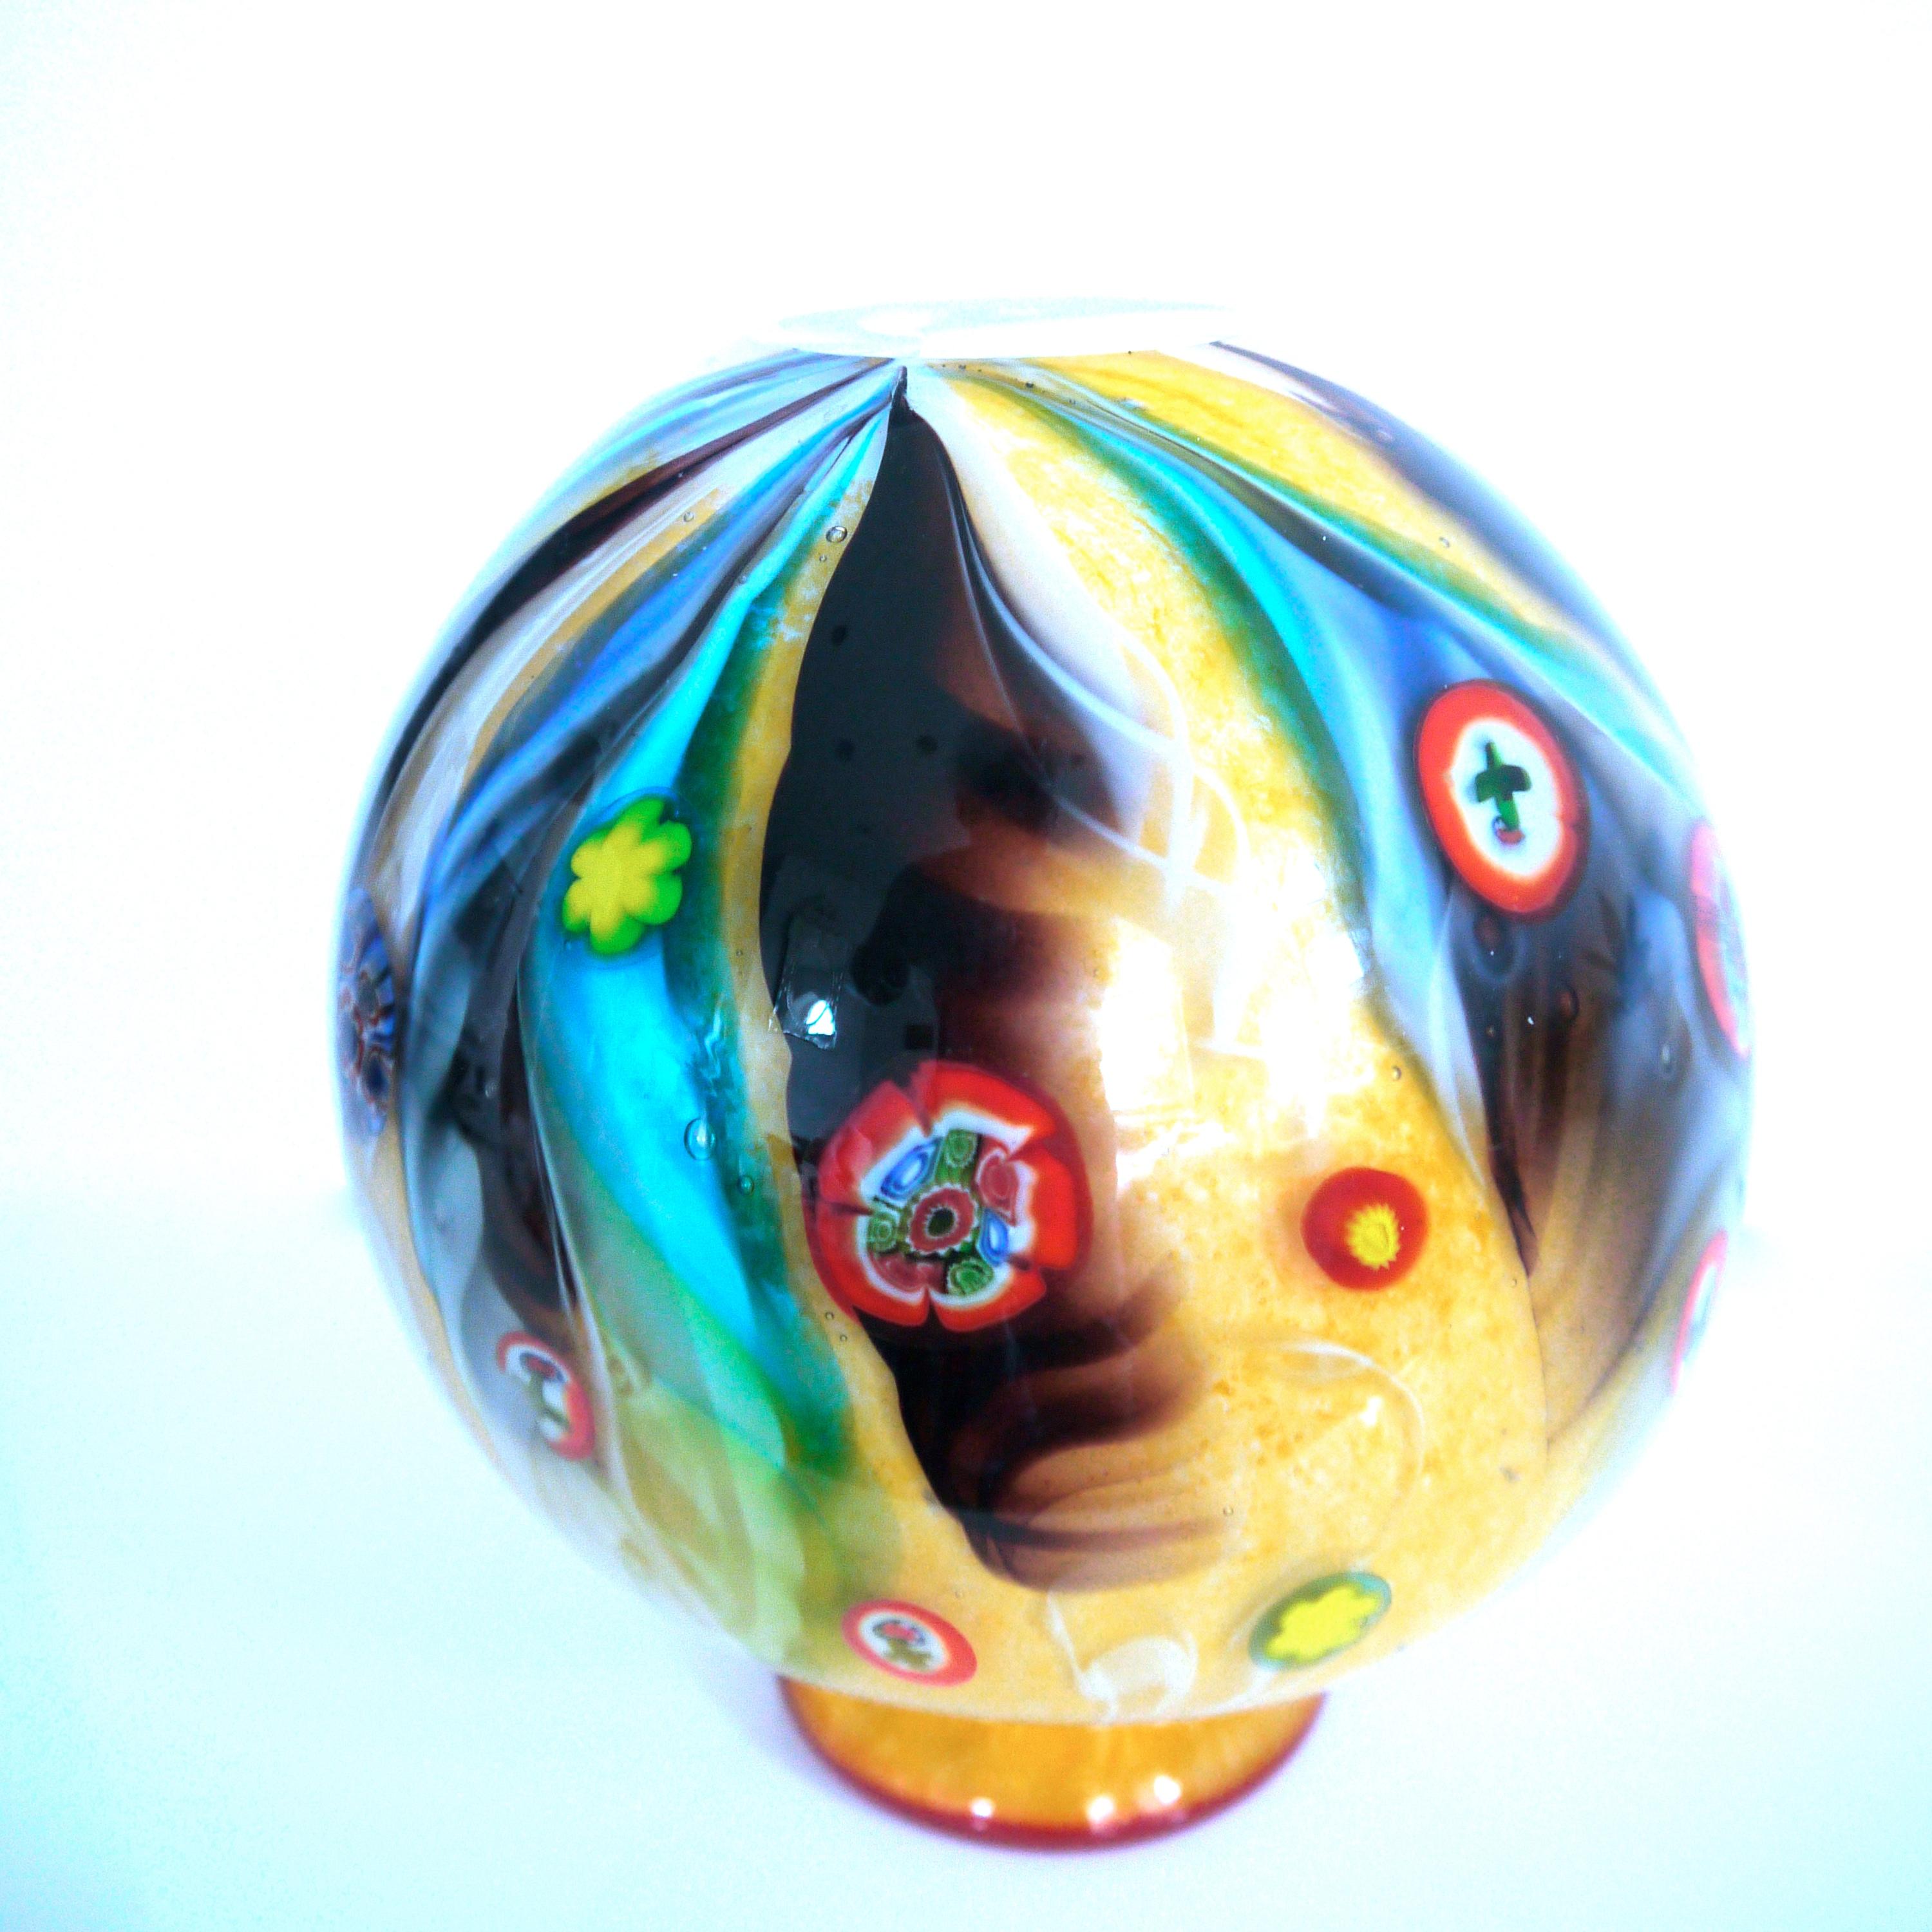 Mid-20th Century 1950 Modernist Italian Murano Mille Fiori 'Orb' Glass Vase by Fratelli Toso For Sale